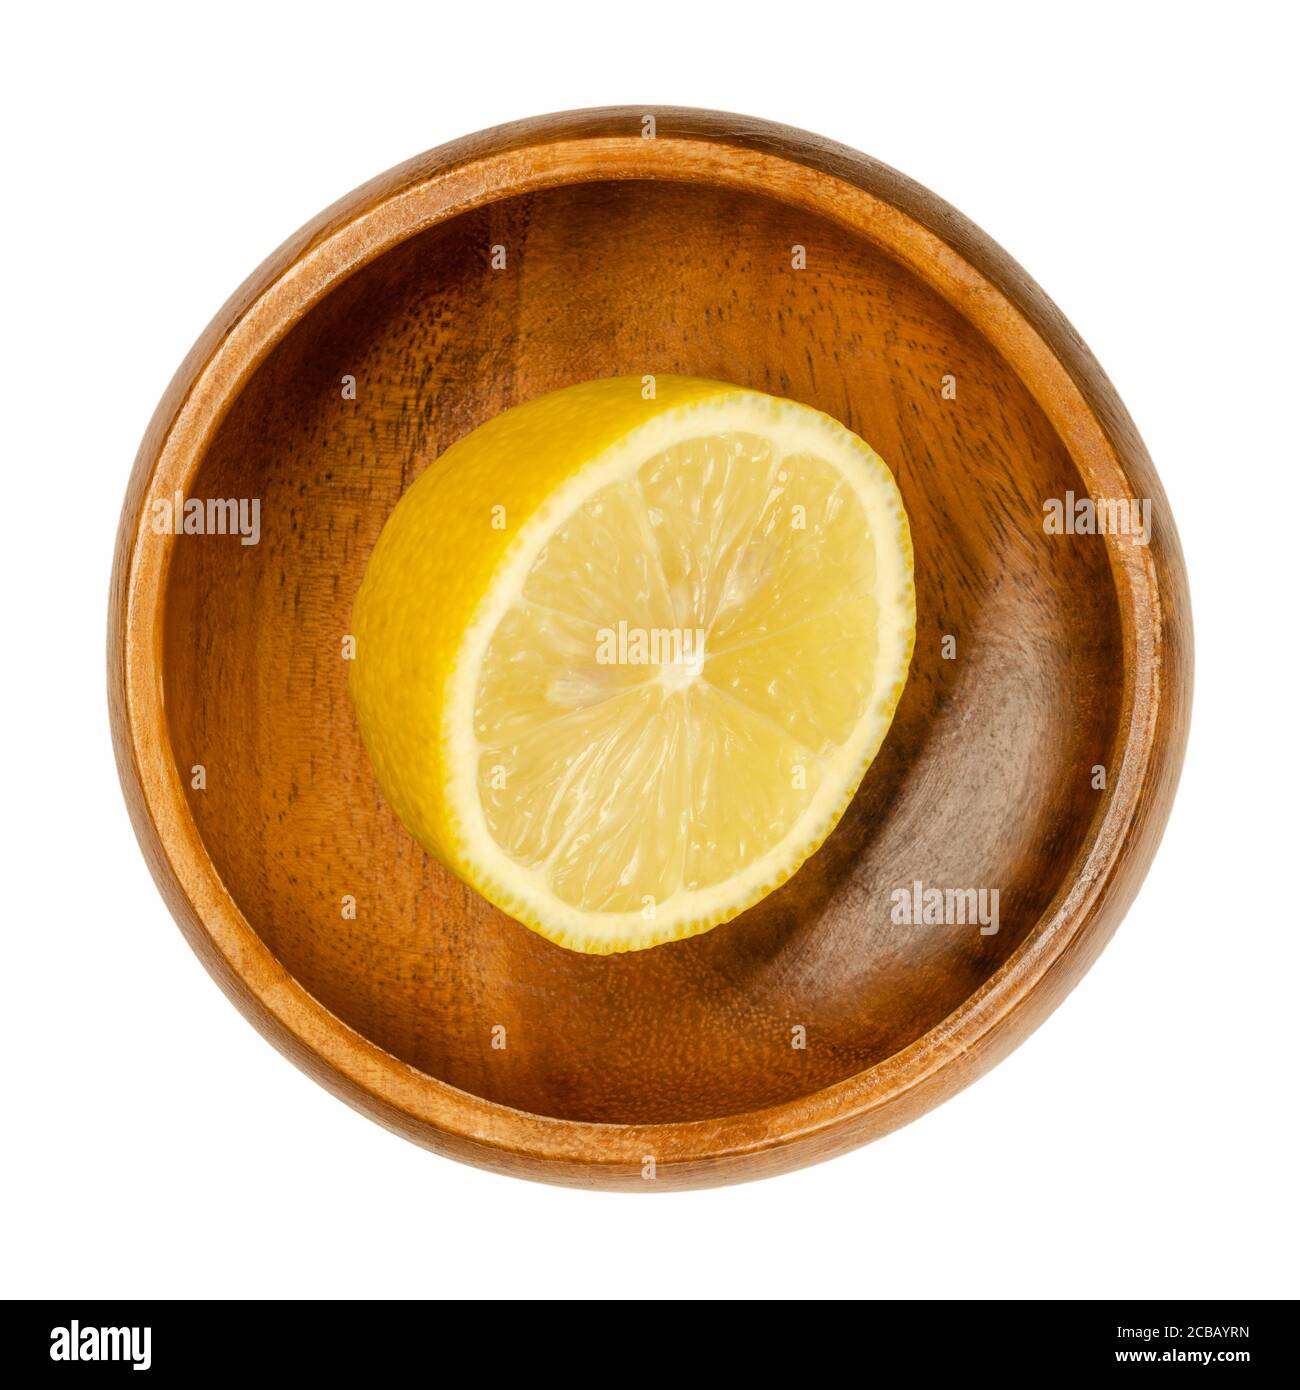 Fresh and ripe half lemon in a wooden bowl. Cut yellow edible citrus fruit, Citrus limon. Lemon juice is used for culinary purposes and for cleaning. Stock Photo